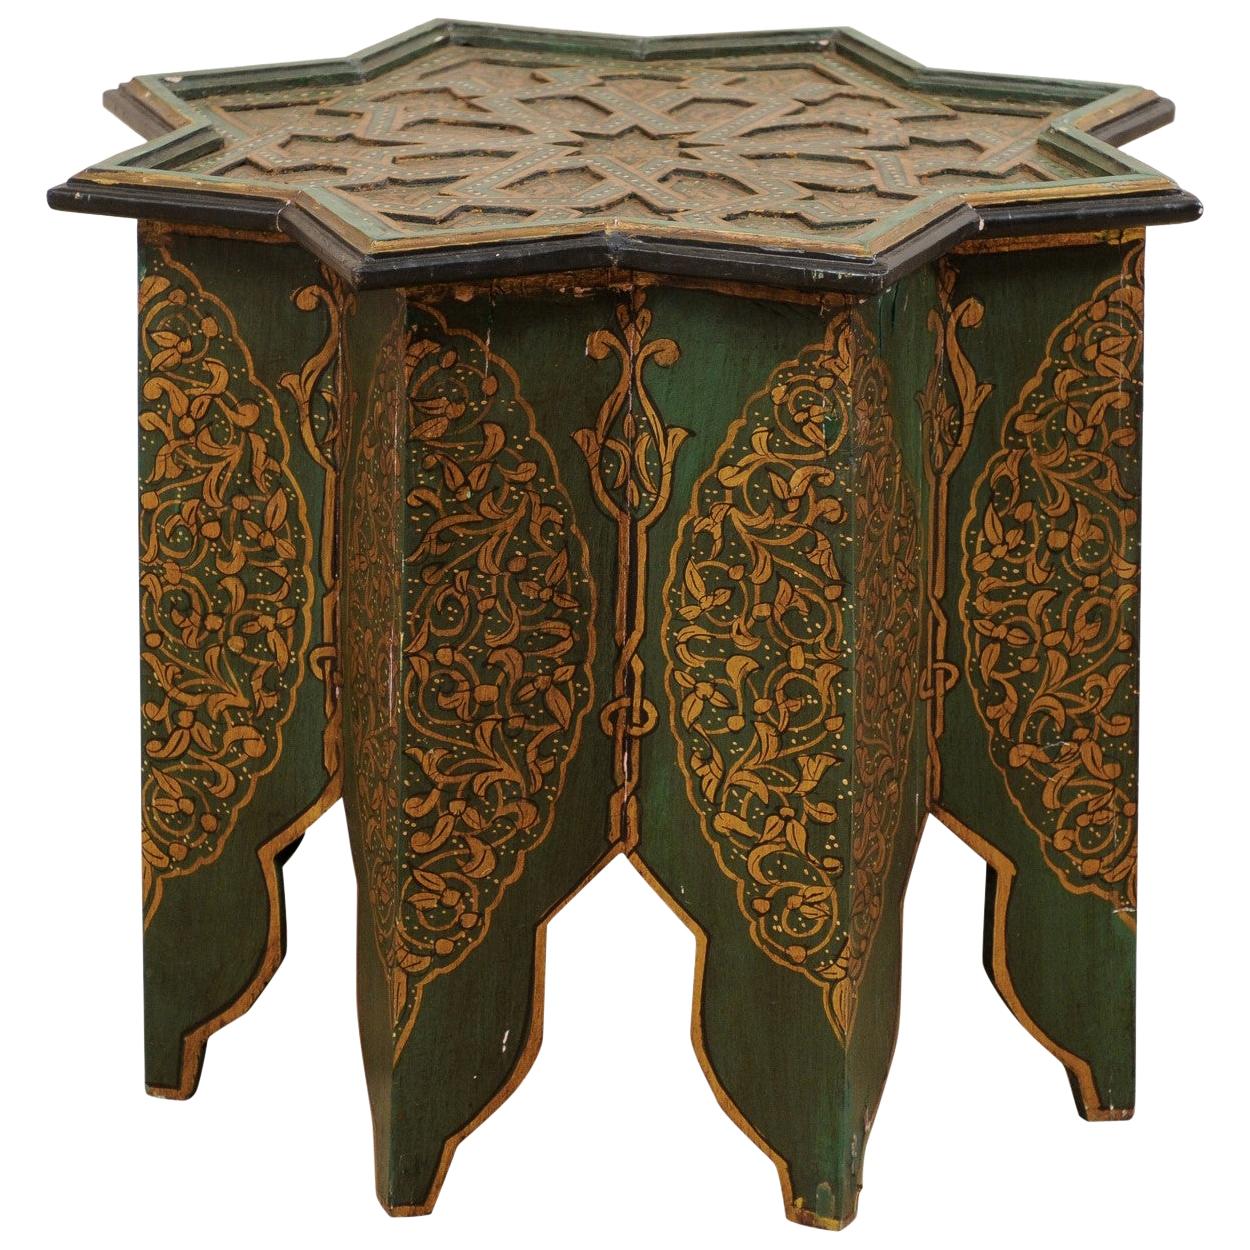 Moroccan Morrish Star Shaped Tea or Side Table, in Green, Black and Gold